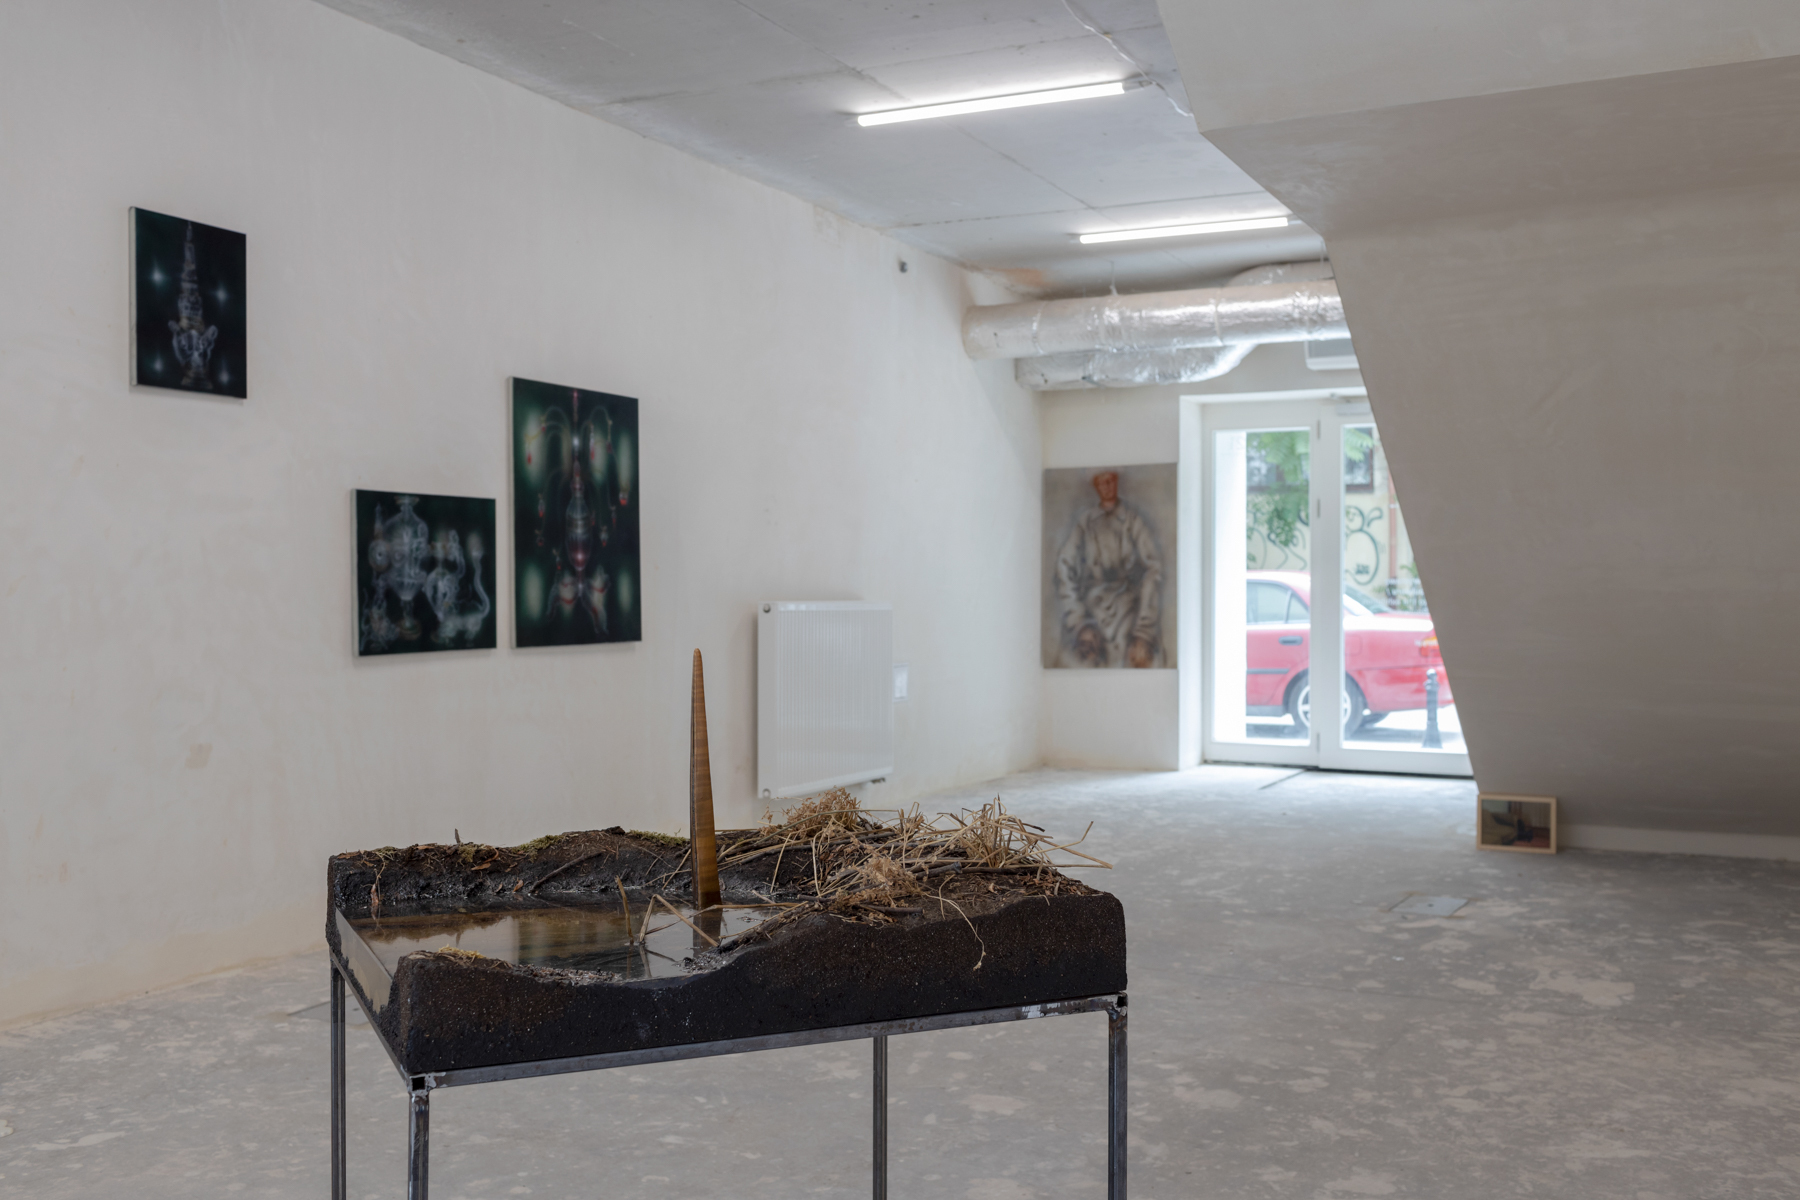 If Wishes Were Fishes, We’d All Cast Nets, exhibition view, works by Alicja Pakosz and Veronika Hapchenko